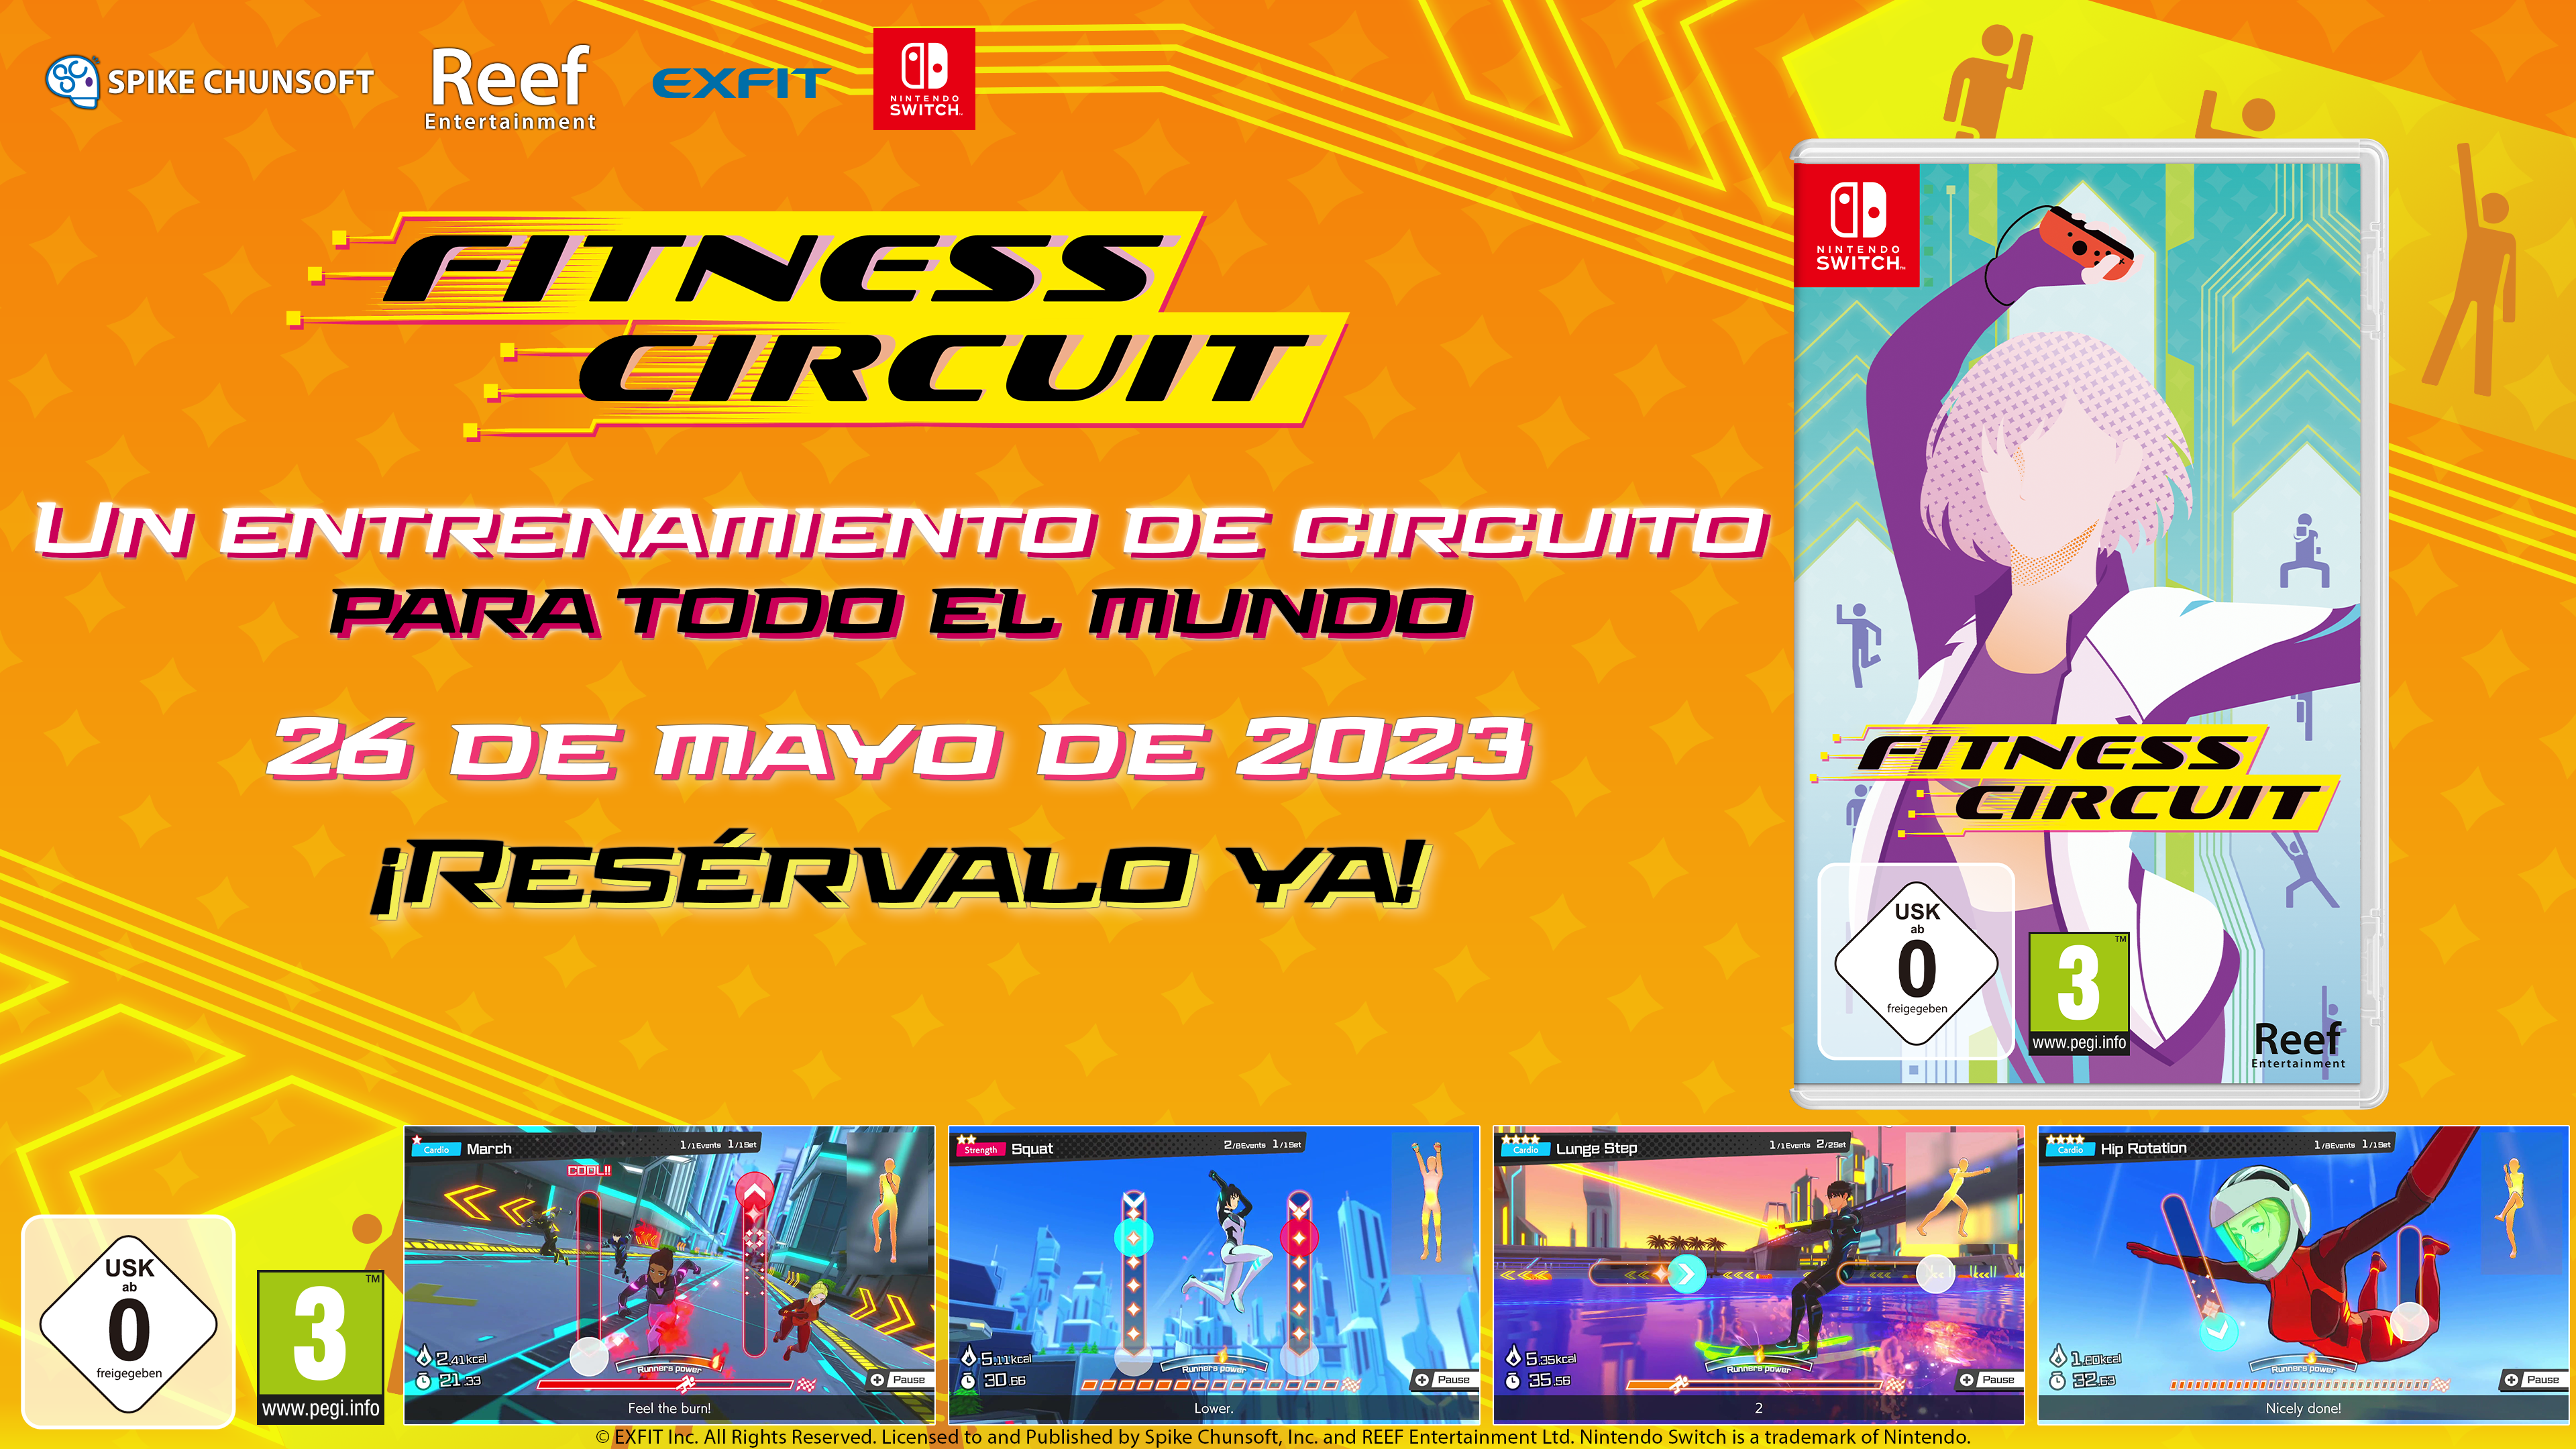 Fitness Circuit Circuit Training For Everybody May 26, 2023